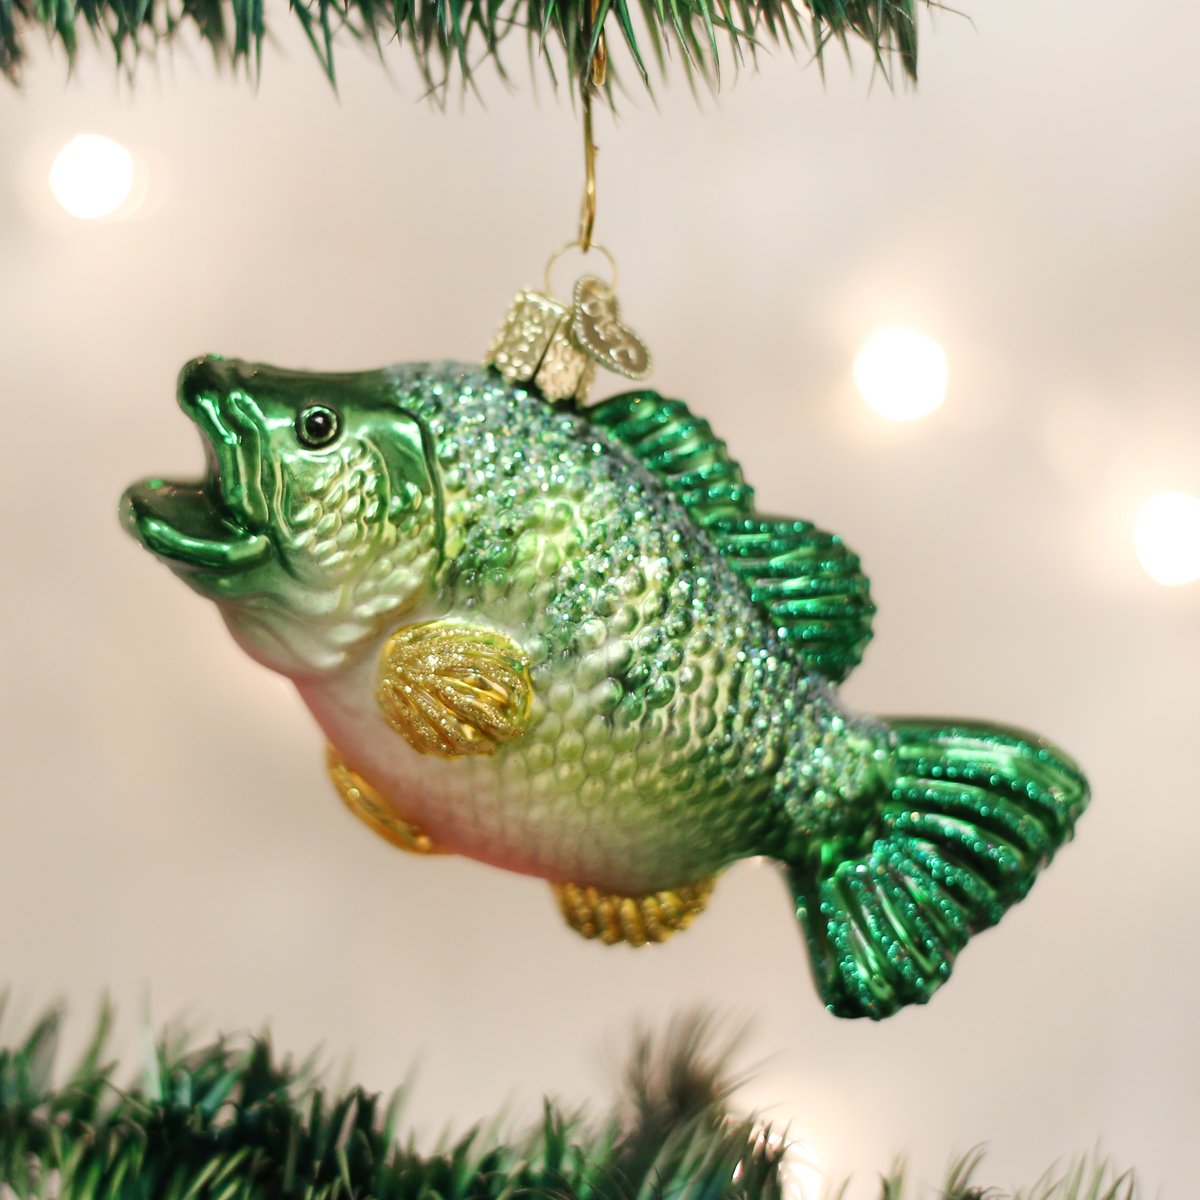 largemouth bass fish ornament glass christmas decoration for the holidays from old world christmas lifestyle